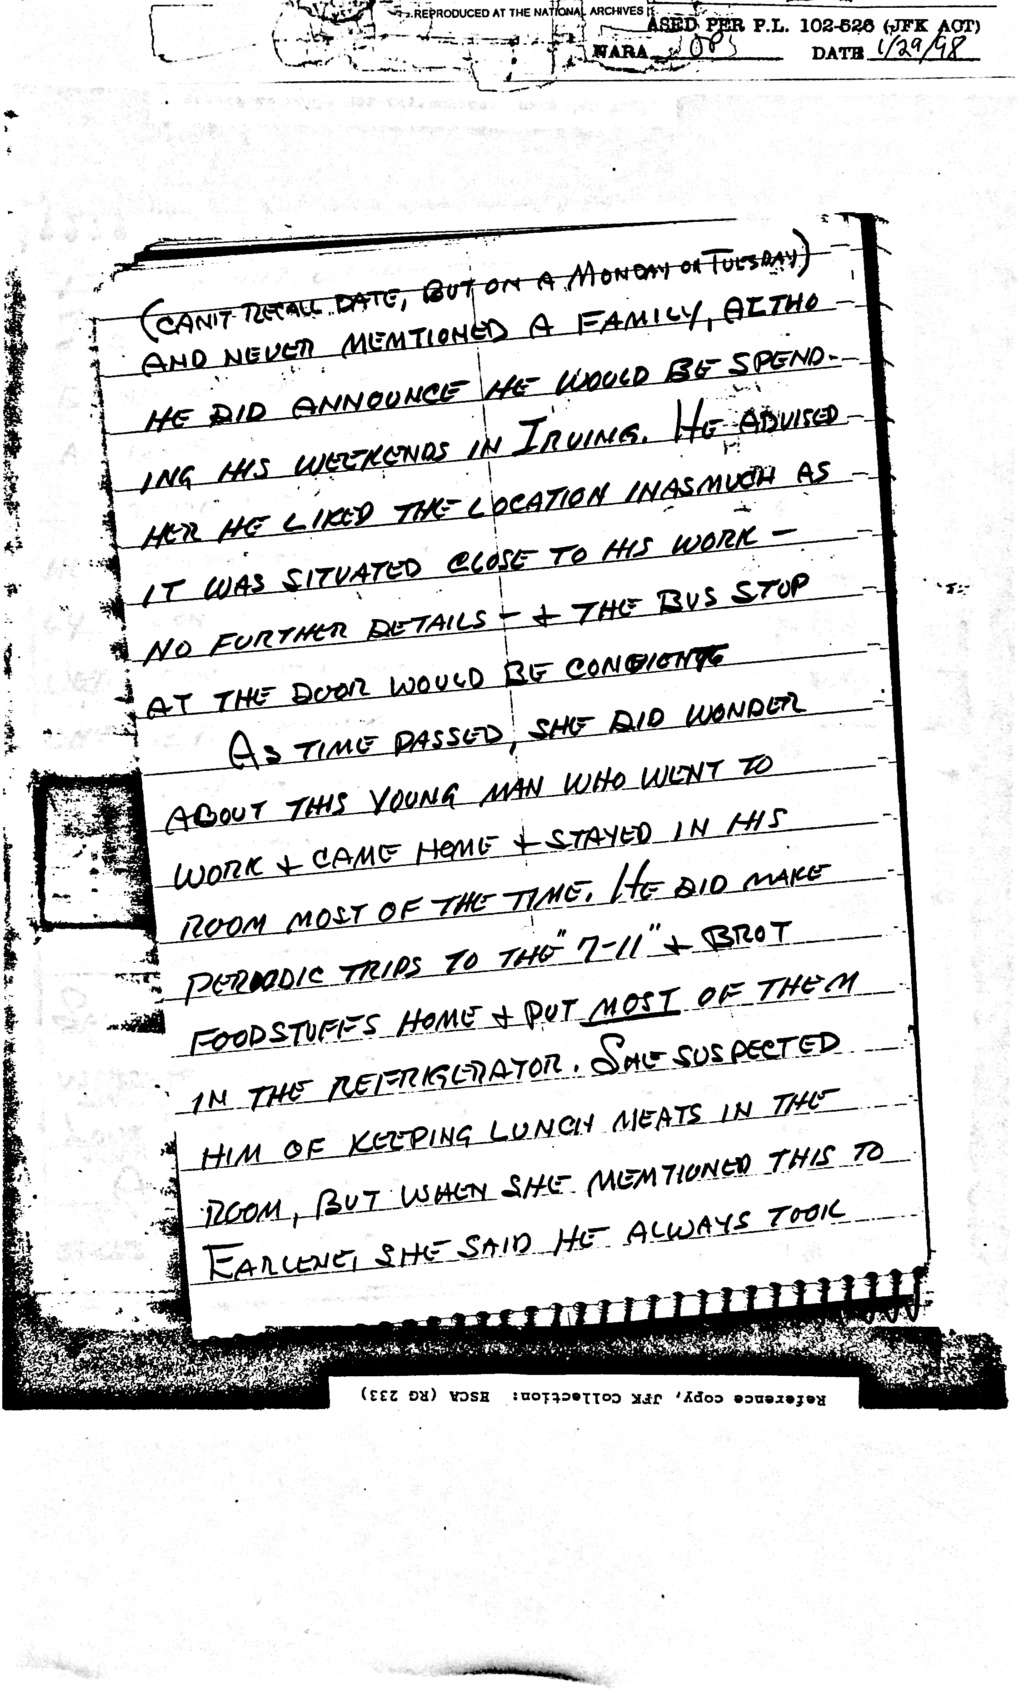 beckley - 	Did Oswald deny living at 1026 N Beckley?  - Page 6 Feb_8_14